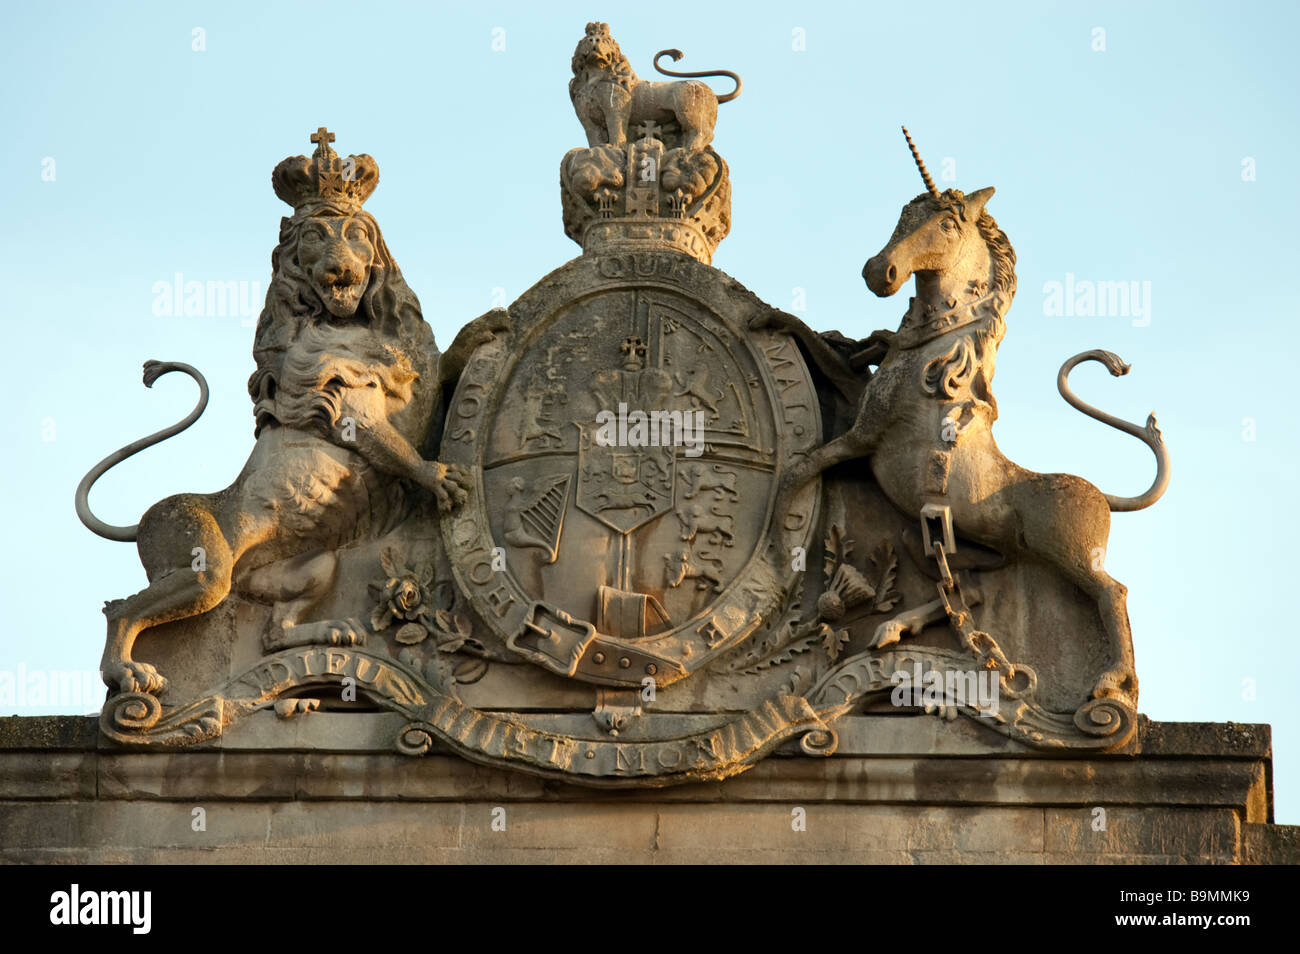 Official Royal Coat of Arms – with lion and unicorn & Dieu et mon droit motto –  in stone form on the roof of Theatre Royal Bath Stock Photo